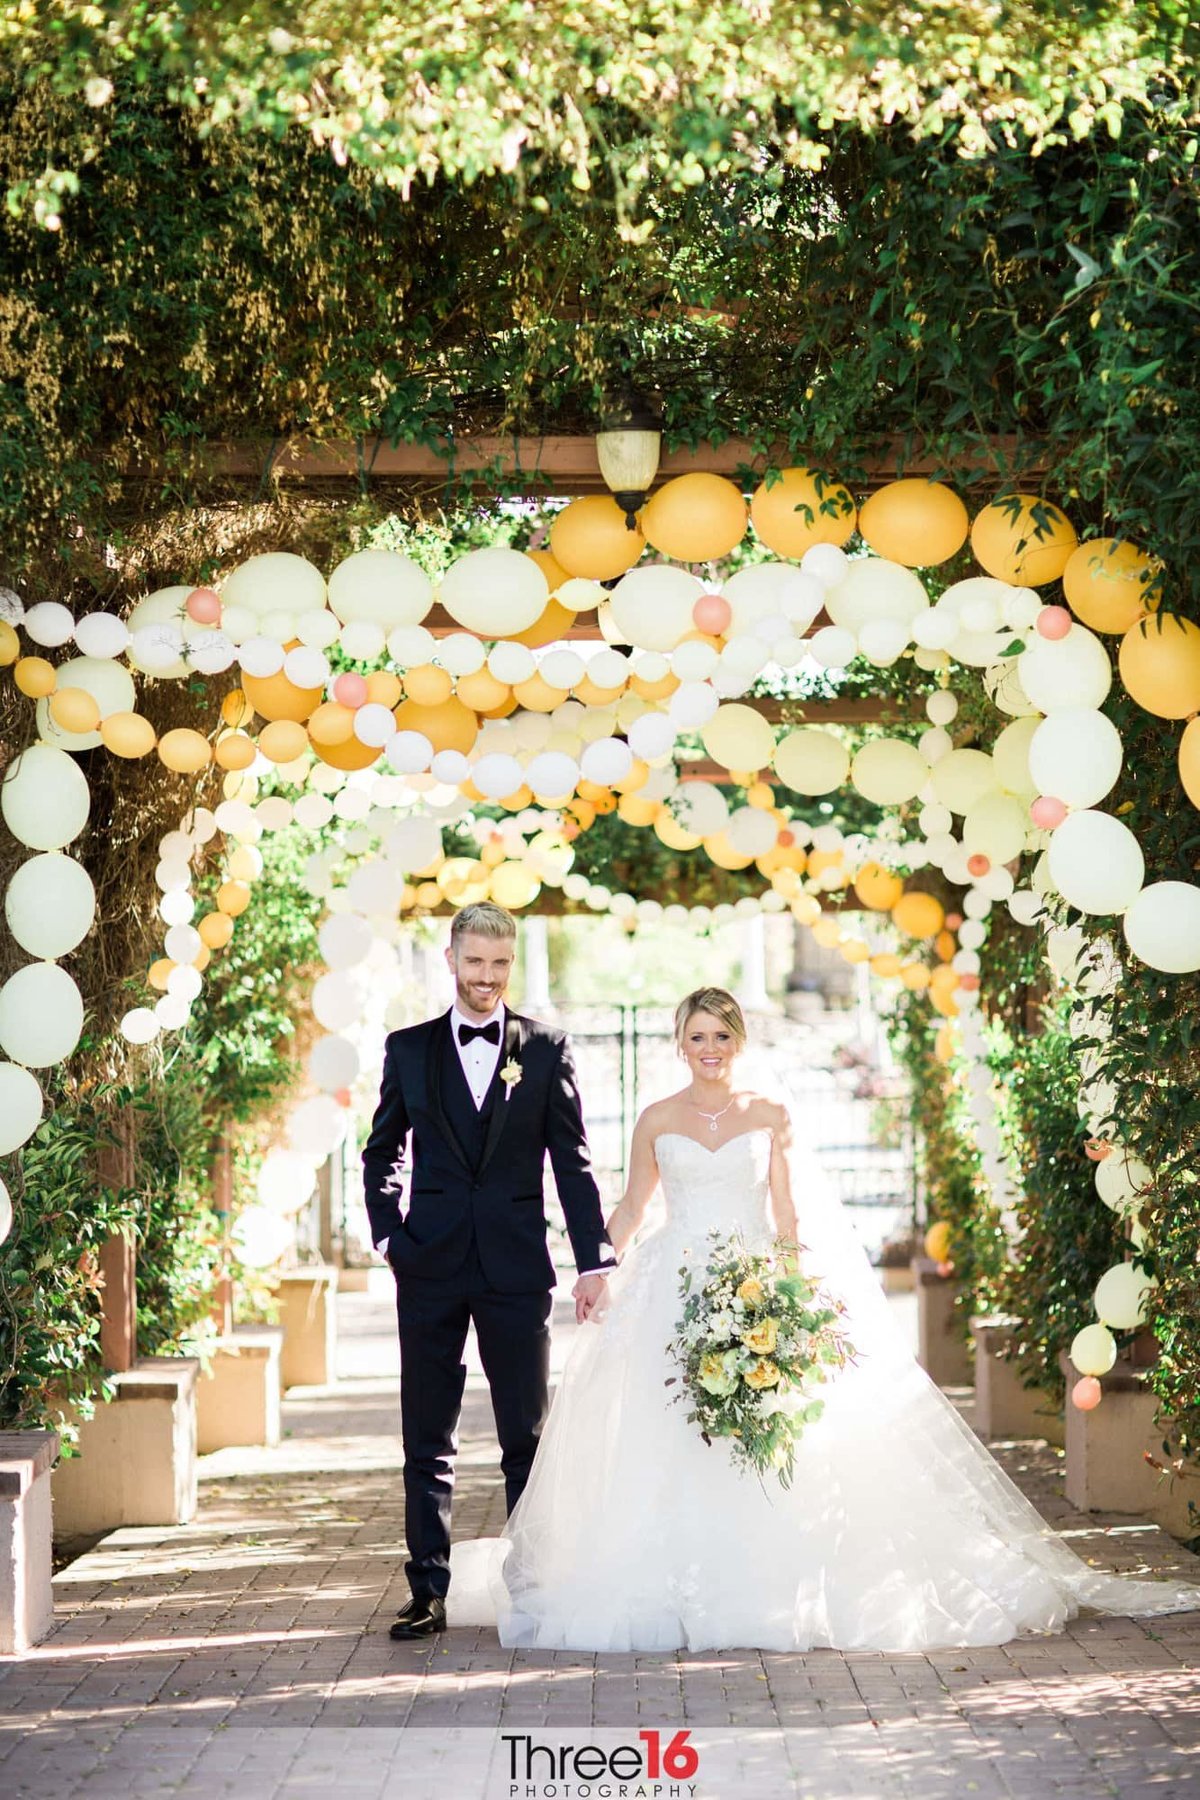 Bride and Groom walk along a path holding hands under a decorative tunnel of balloons